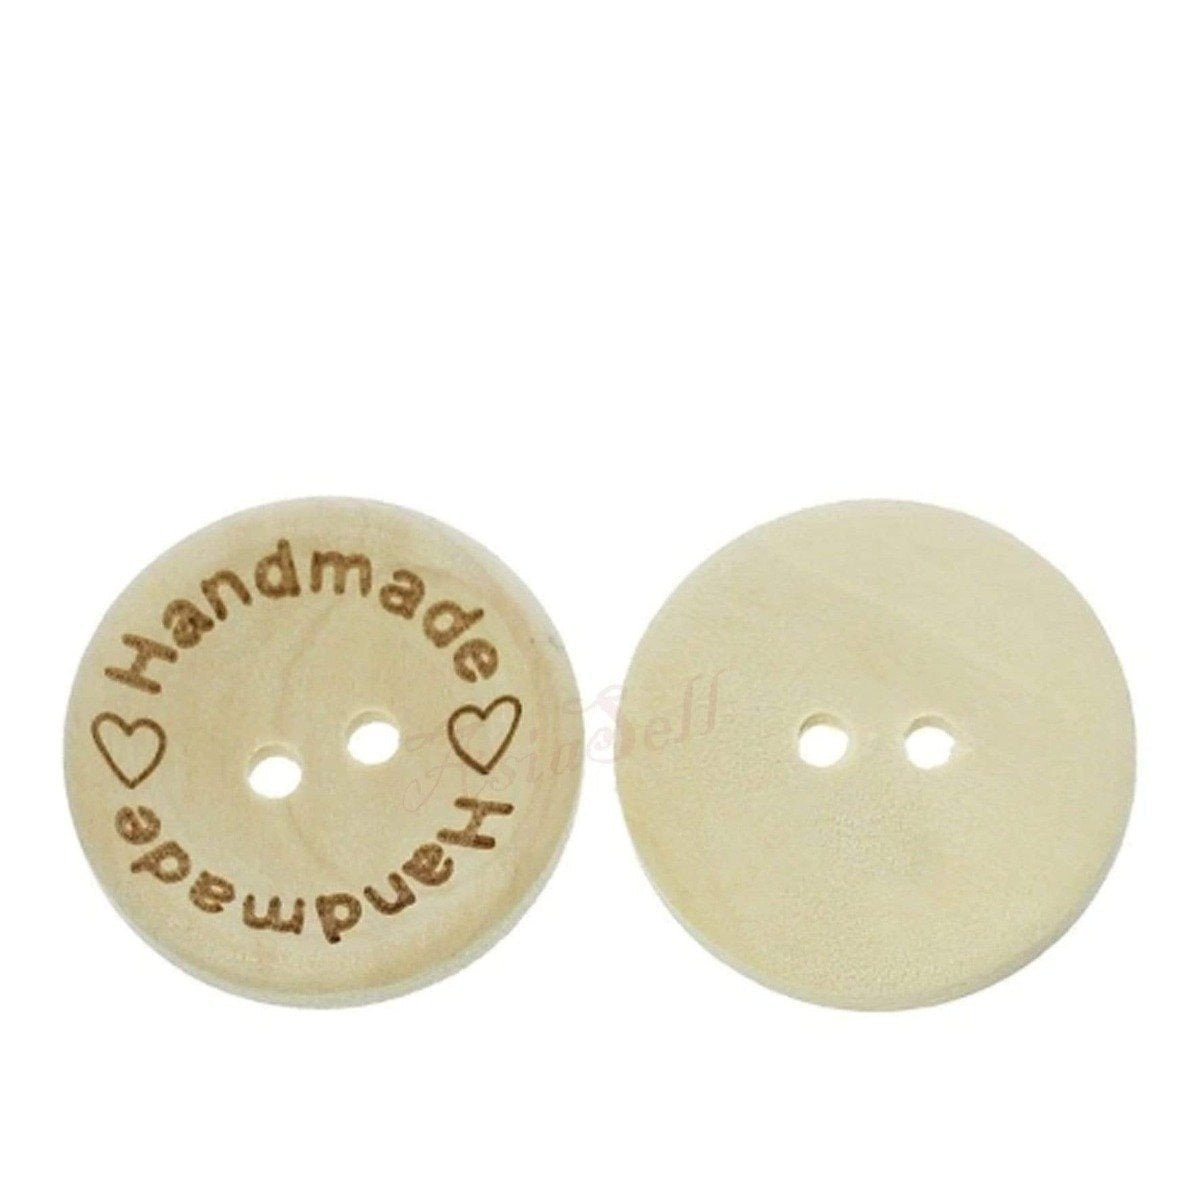 25pcs Wooden Buttons 2-Holes Handmade with Love Round Button Handmade Clothes - 25mm "Handmade" - - Asia Sell